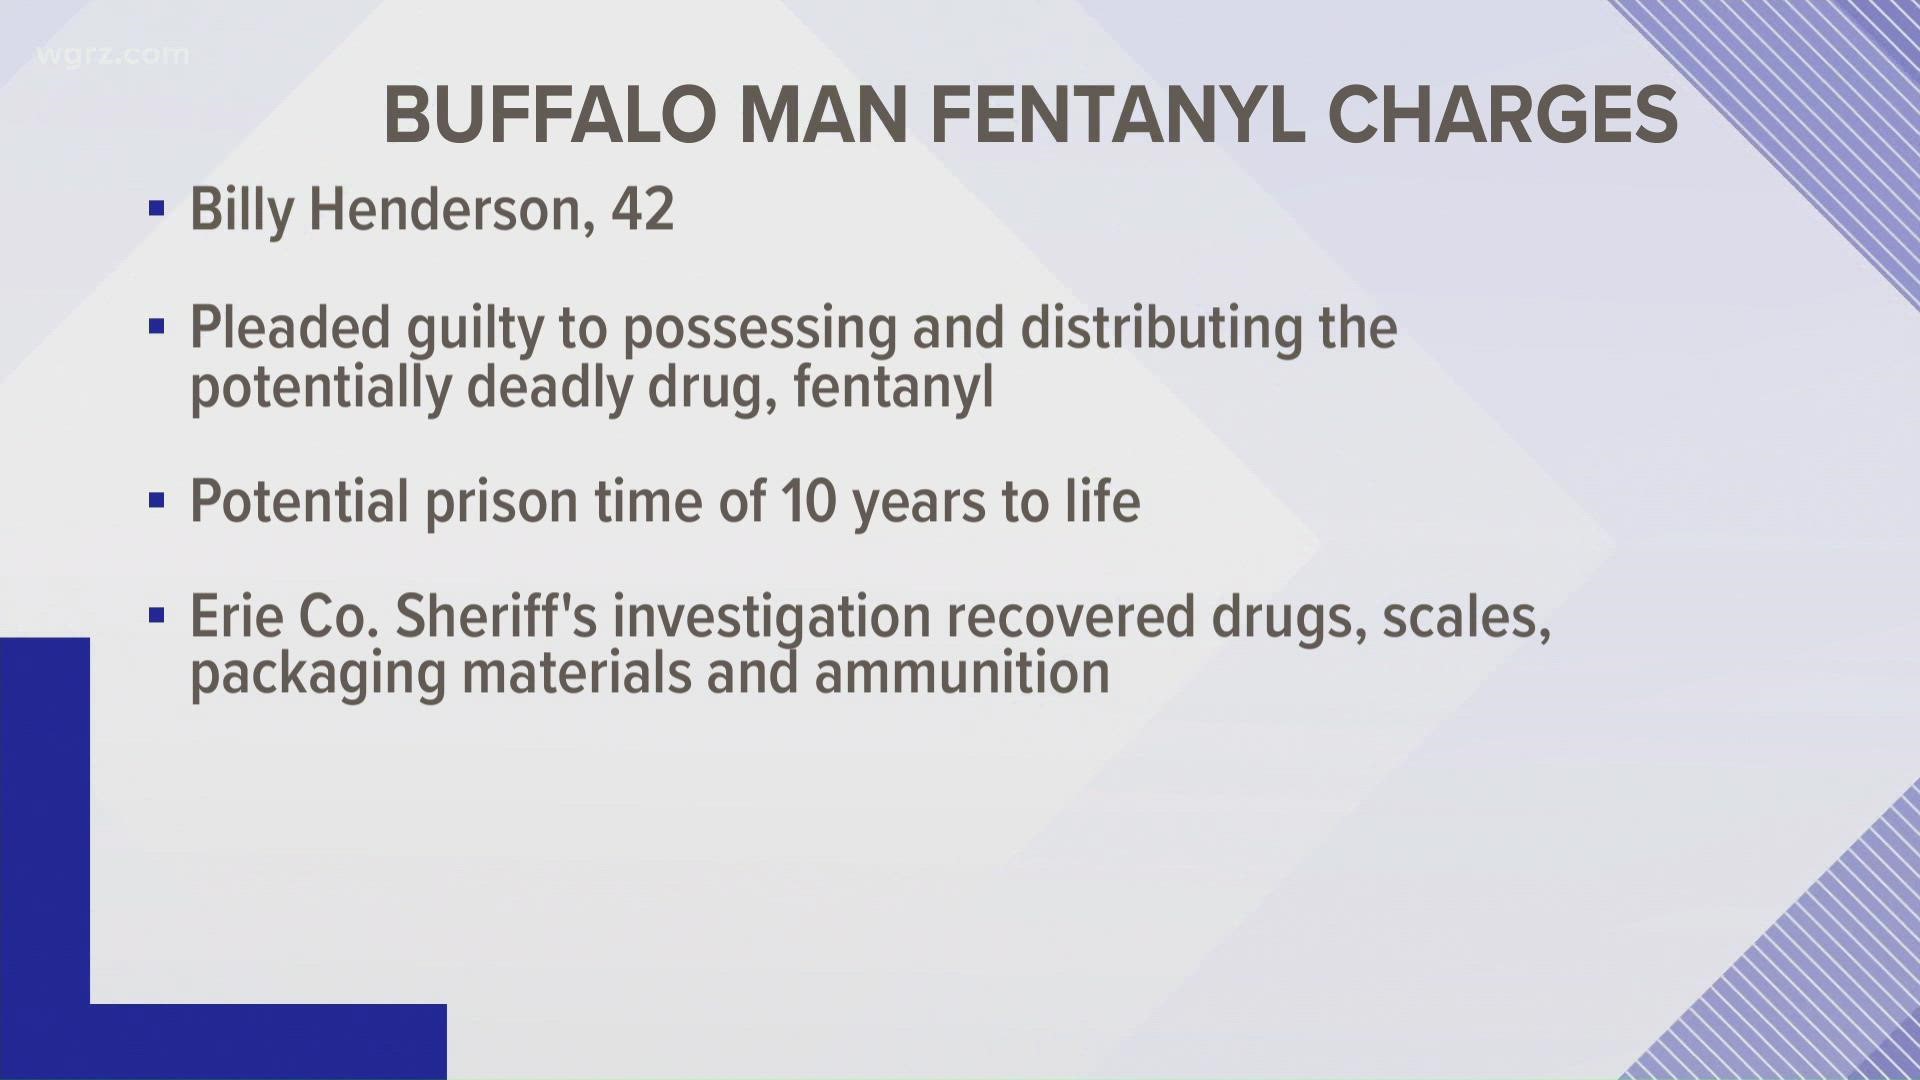 42-year-old Billy Henderson was arrested back in 2019, after the Erie County Sheriff's Office and Homeland Security investigators found 100 grams of Fentanyl.